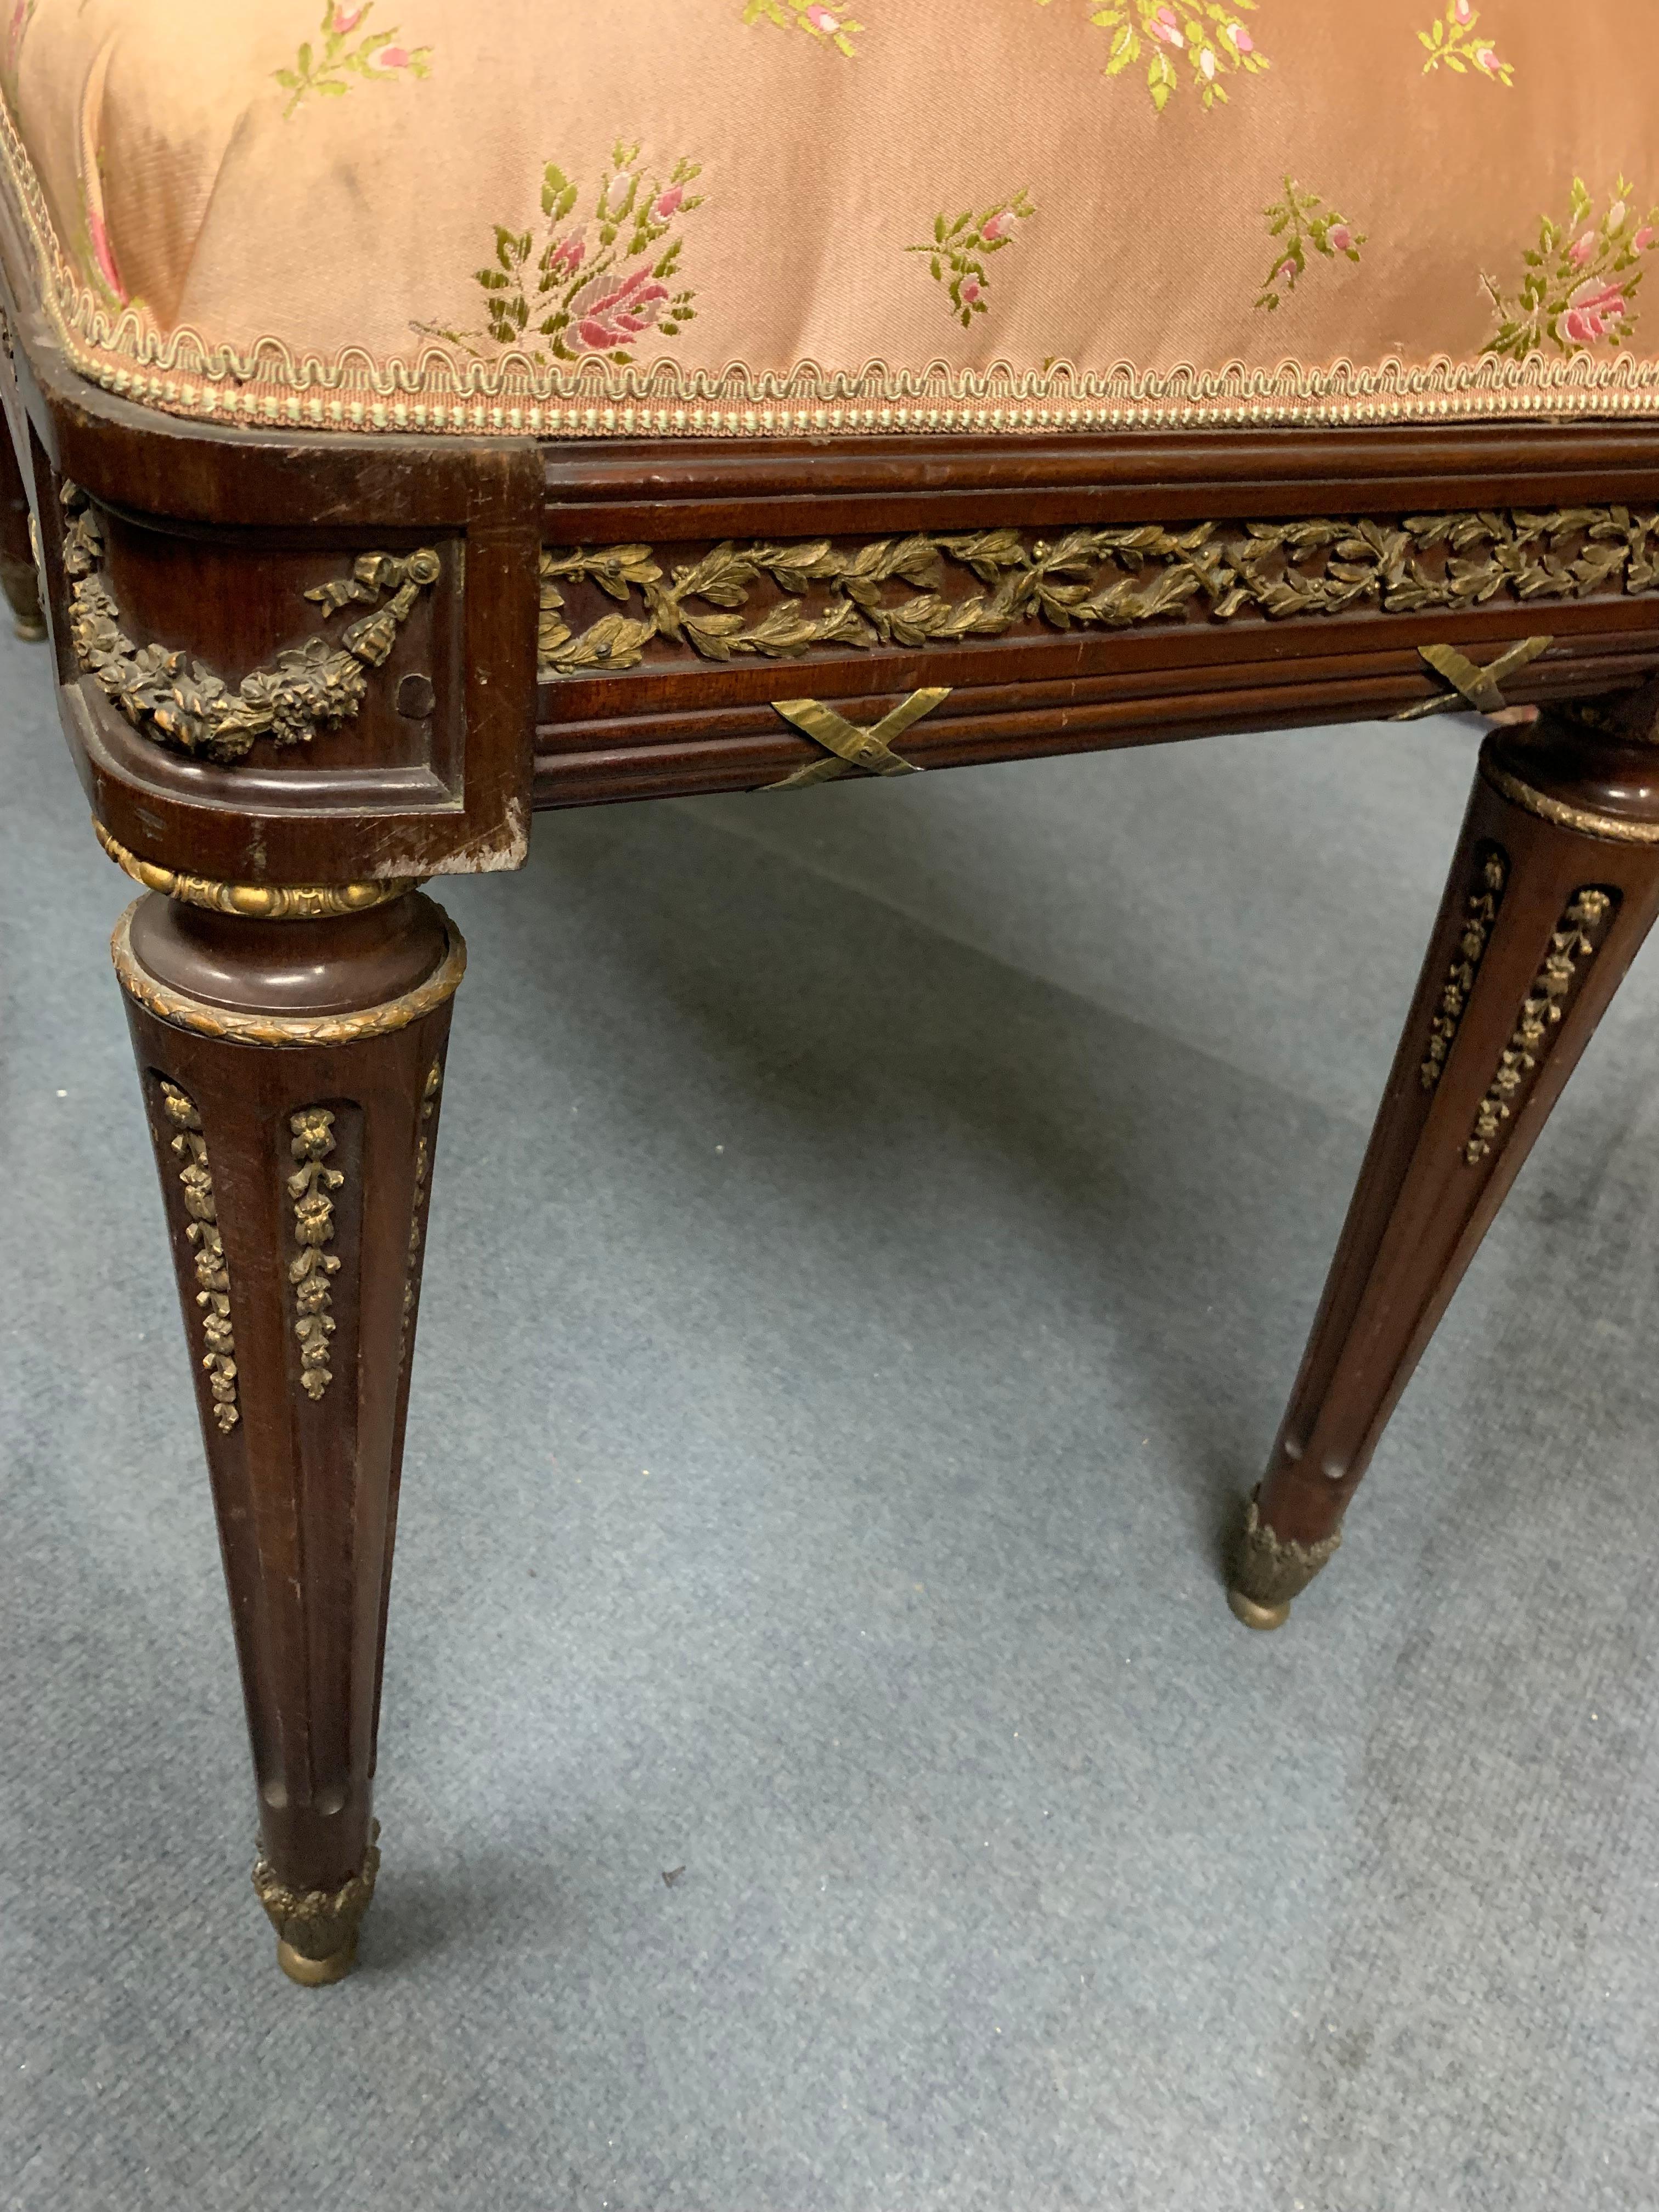 A very decorative bench louis XVI style in mohagany and bronze ,The entire belt of the bench is surronded by finely chiseled bronze, the top of the footis surronded by a bronze ring and you have bronze palmettes inside the feet which are finishedby